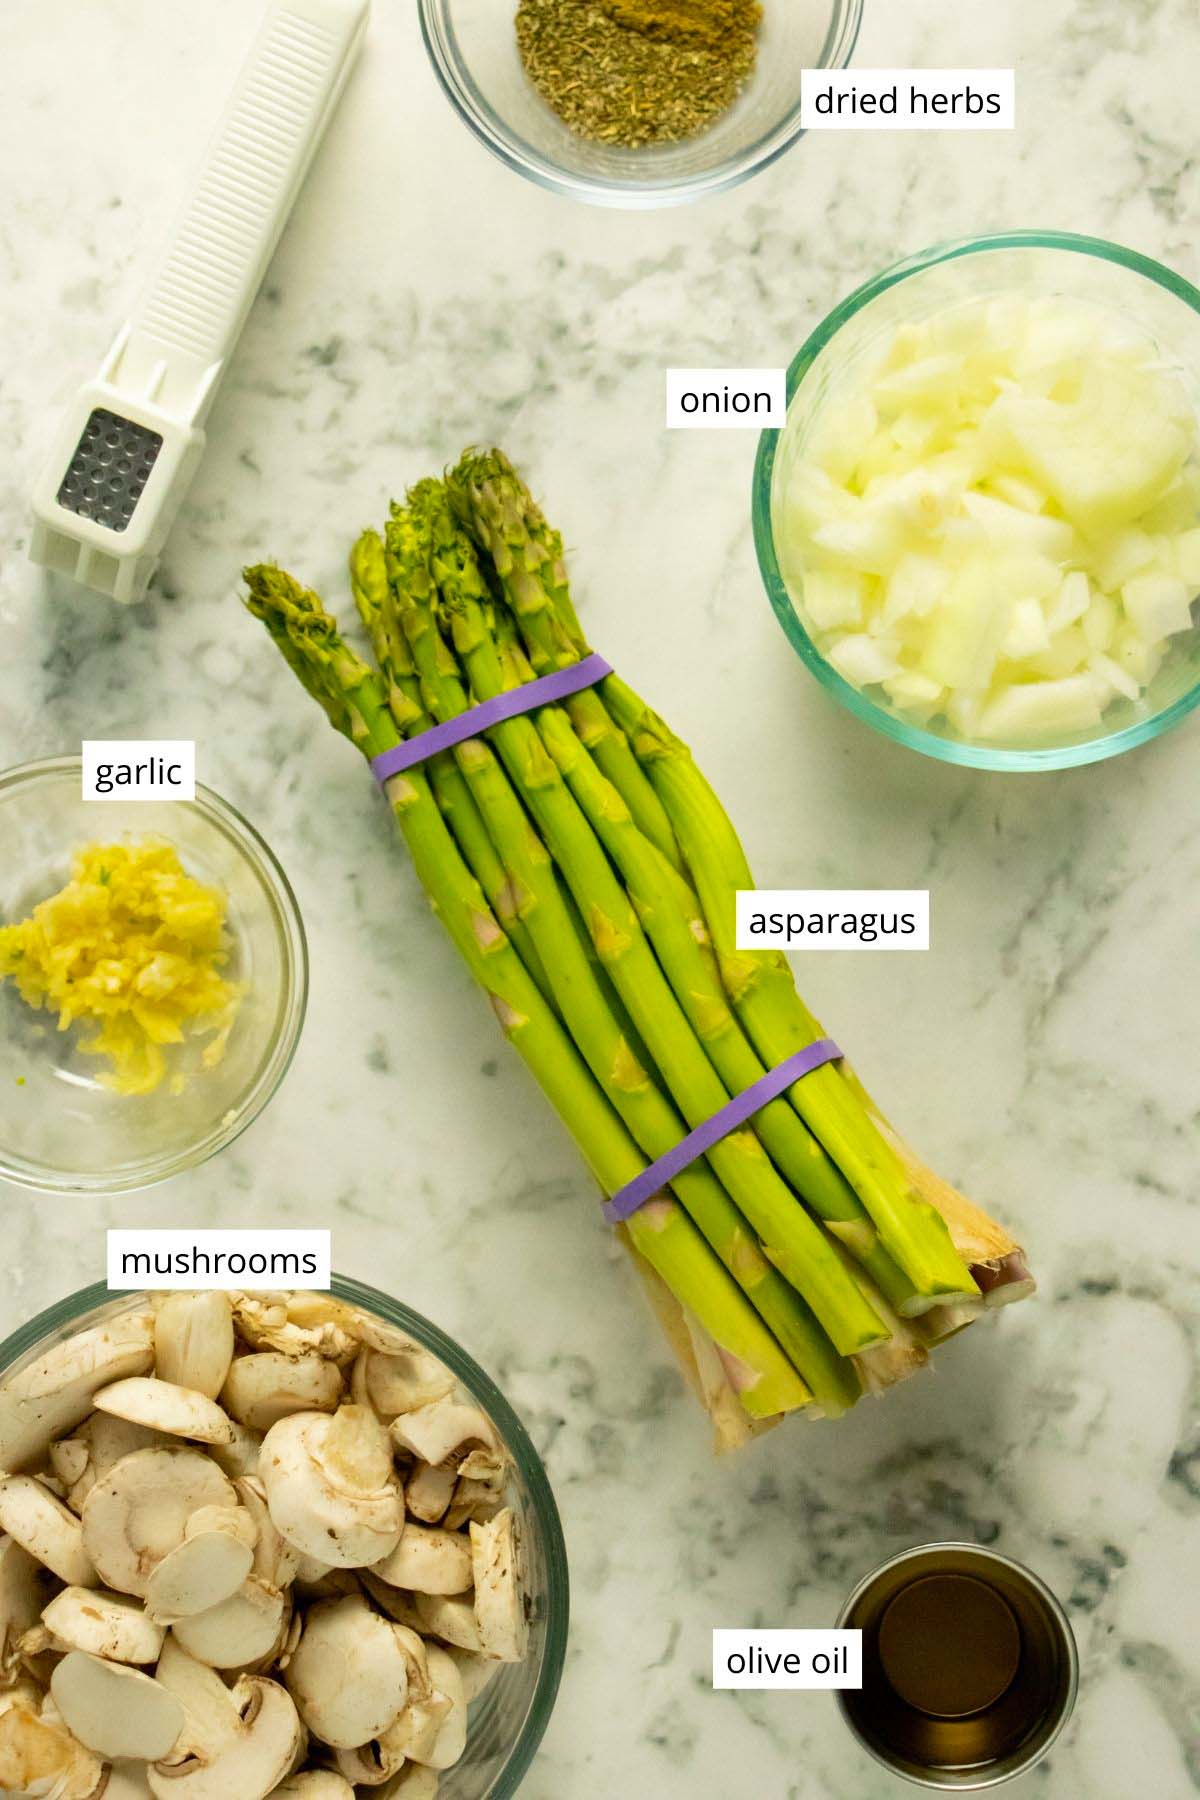 asparagus, mushrooms, and other ingredients in containers on a marble table